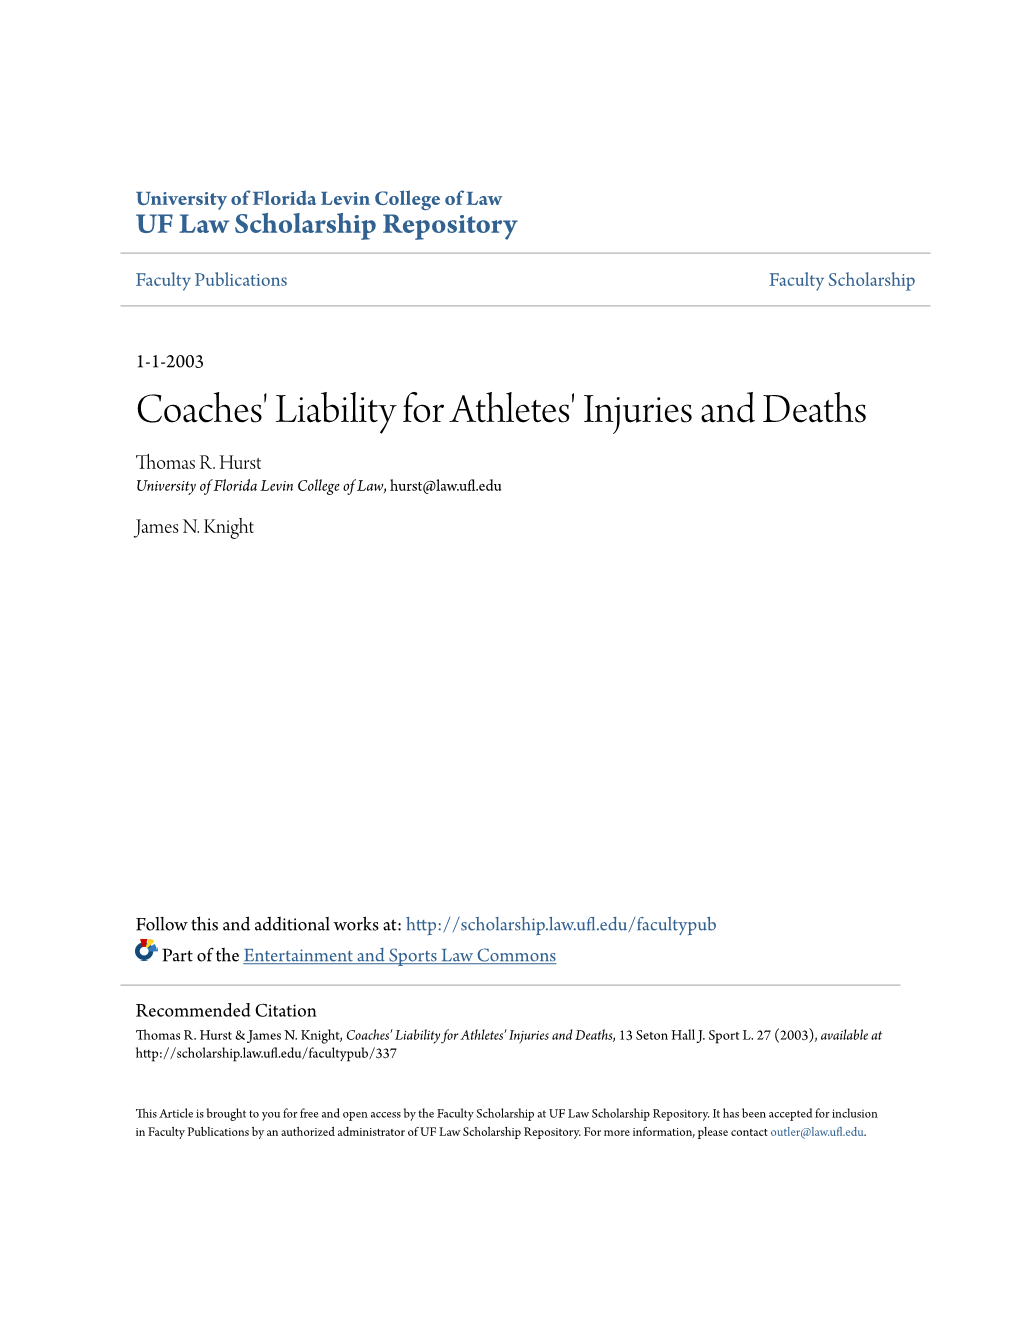 Coaches' Liability for Athletes' Injuries and Deaths Thomas R